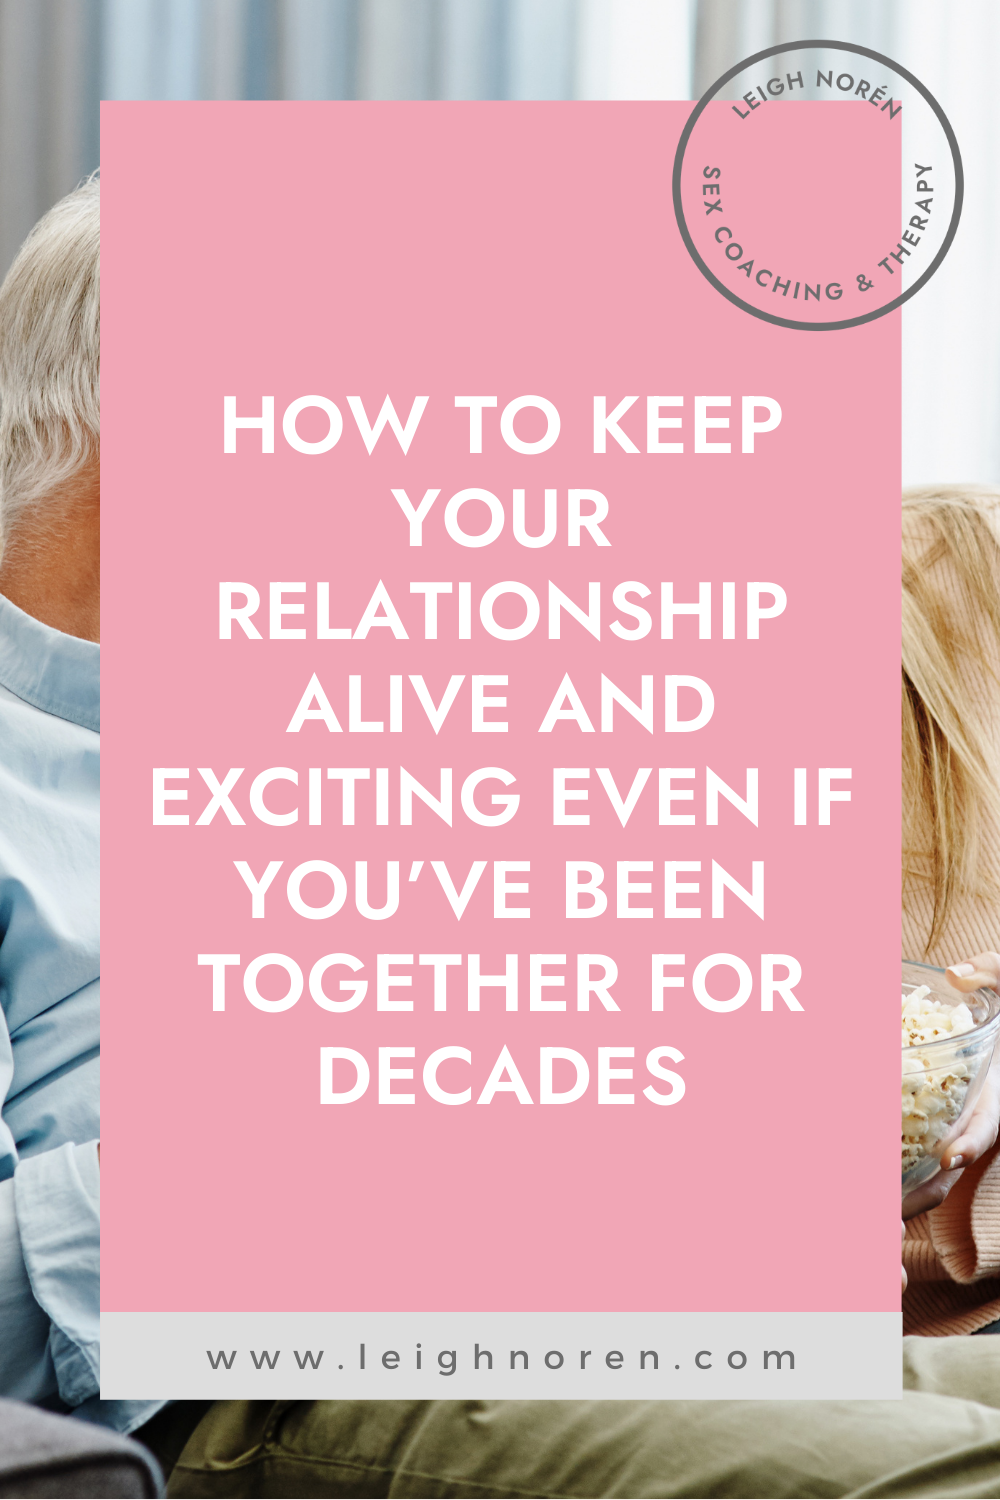 How To Keep Your Relationship Alive And Exciting Even If You've Been Together For Decades